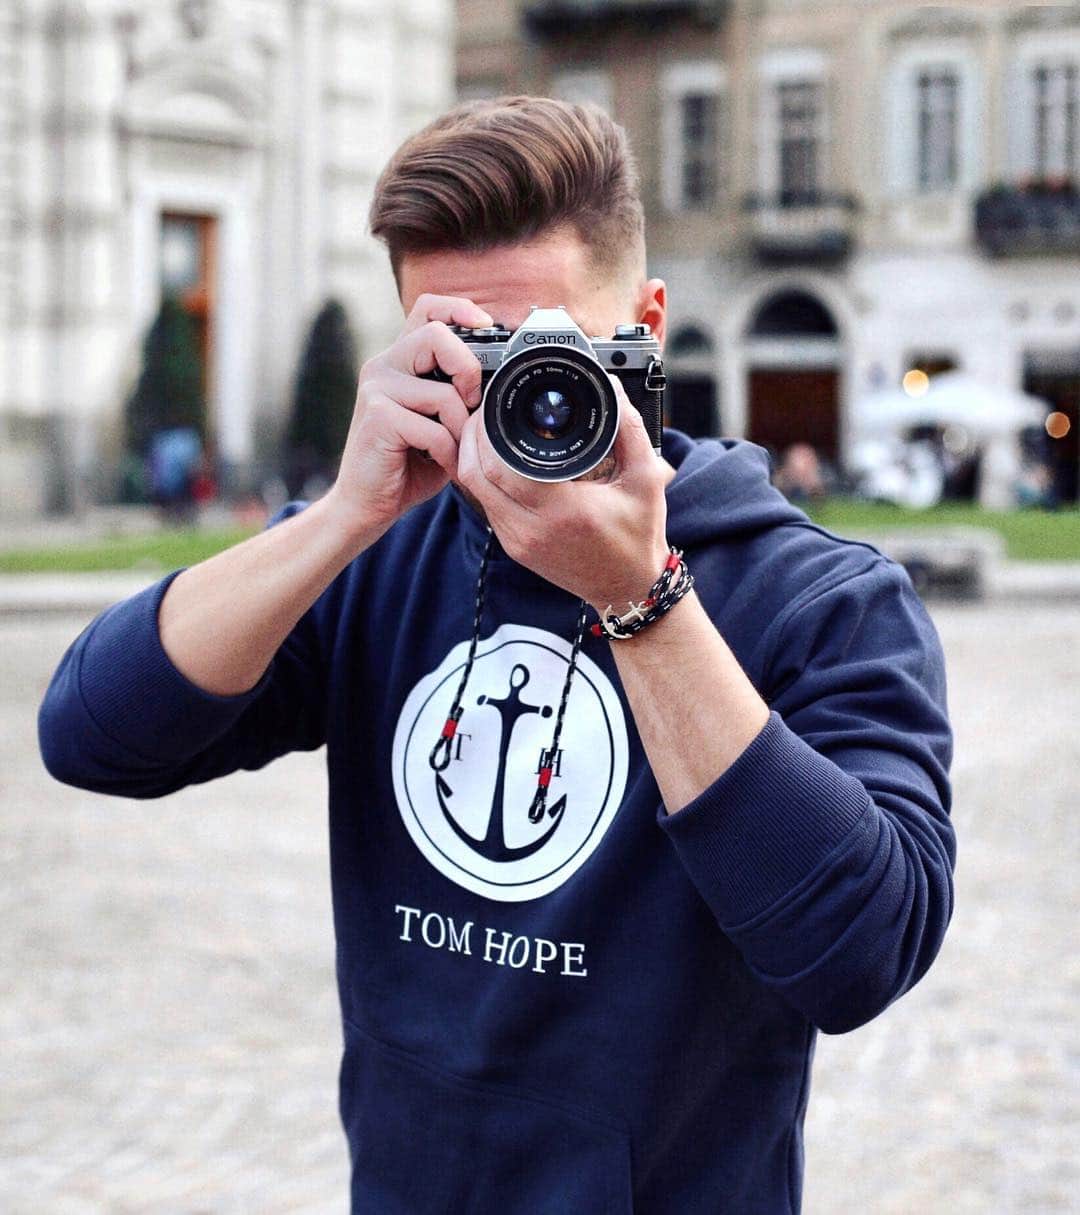 Stefano Trattoのインスタグラム：「Say cheeese!  Around Turin with my 70s babe 📸! Staying warm with my new @thetomhope hoodie ⚓️! #thetomhope #tomhopehoodie ad (More on my Instagram stories)」